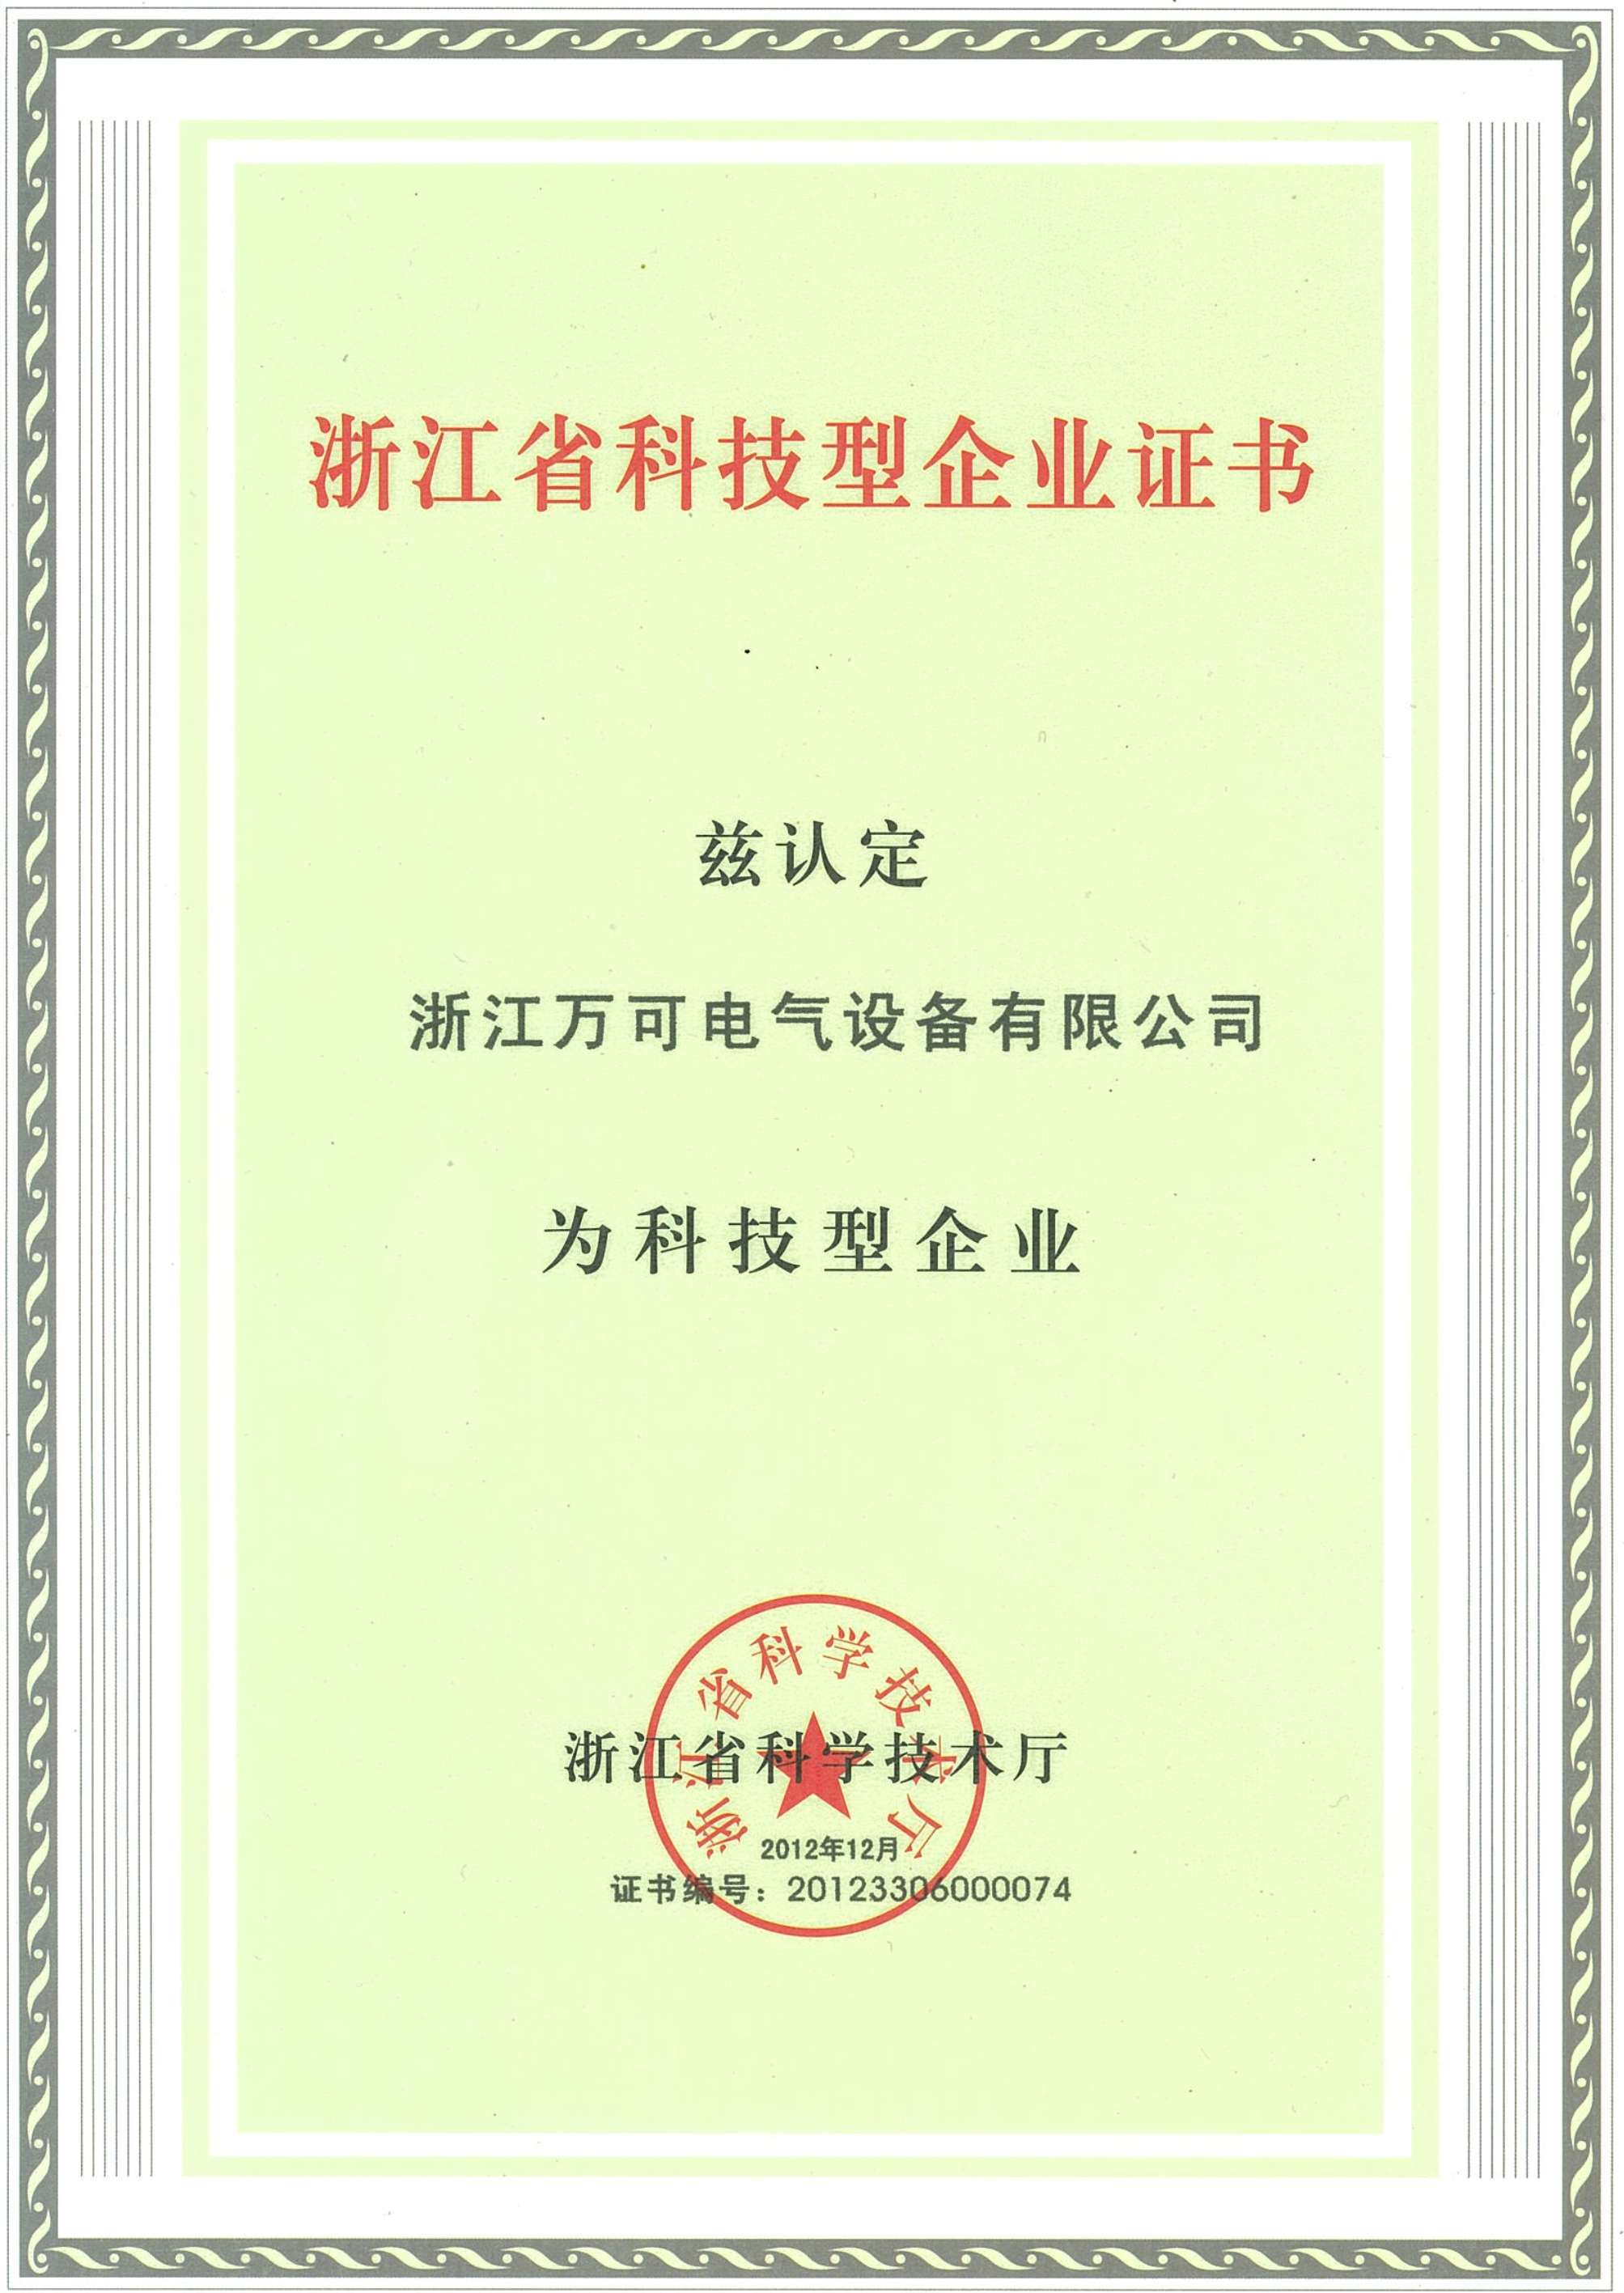 Zhejiang Province science and technology enterprises